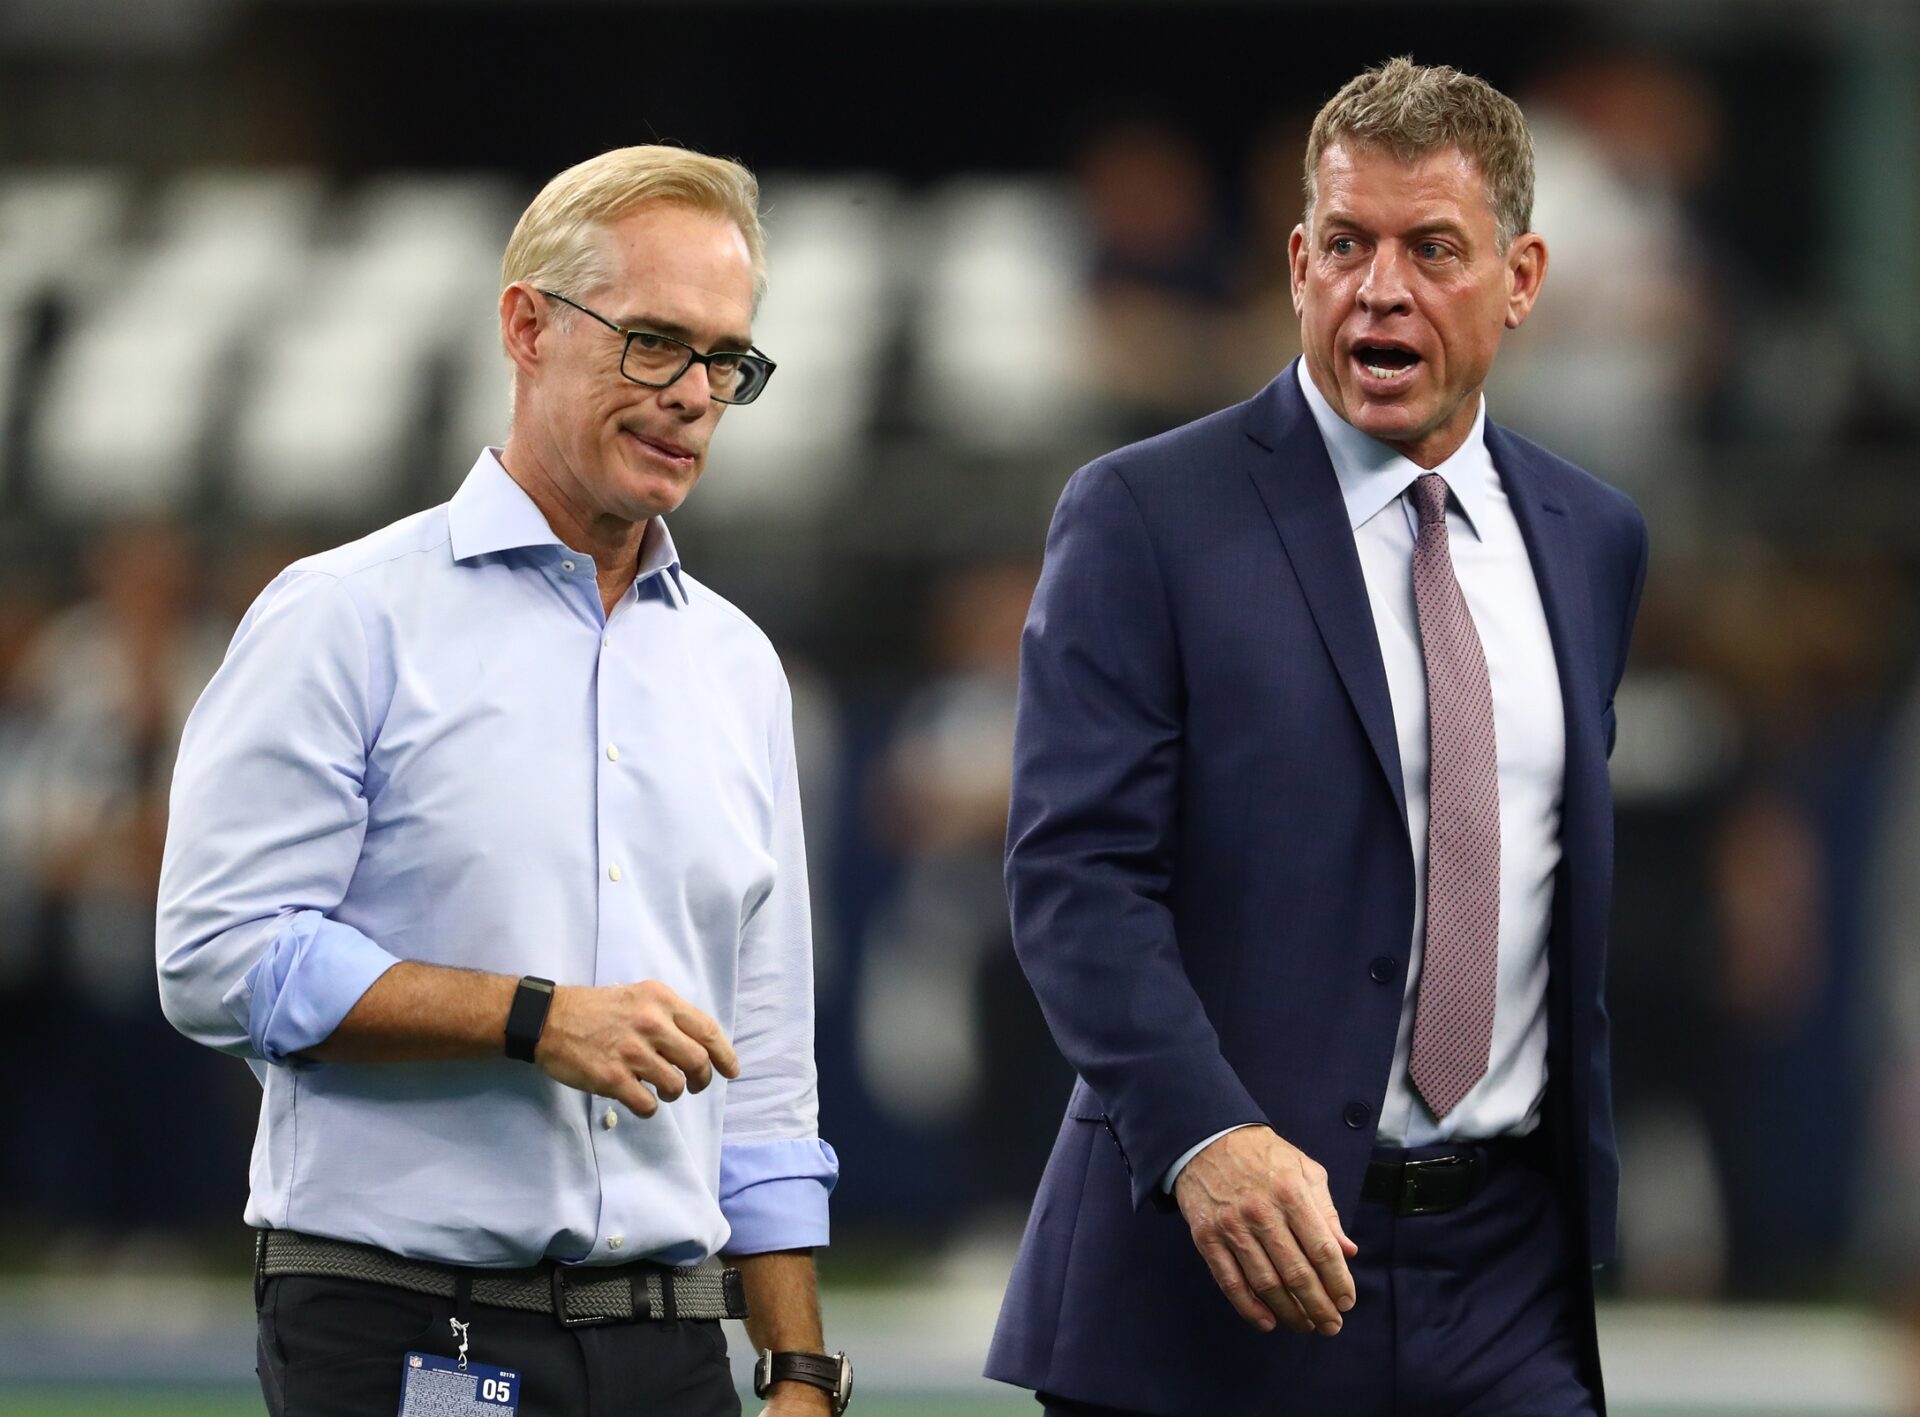 Joe Buck and Troy Aikman on the field before a game.